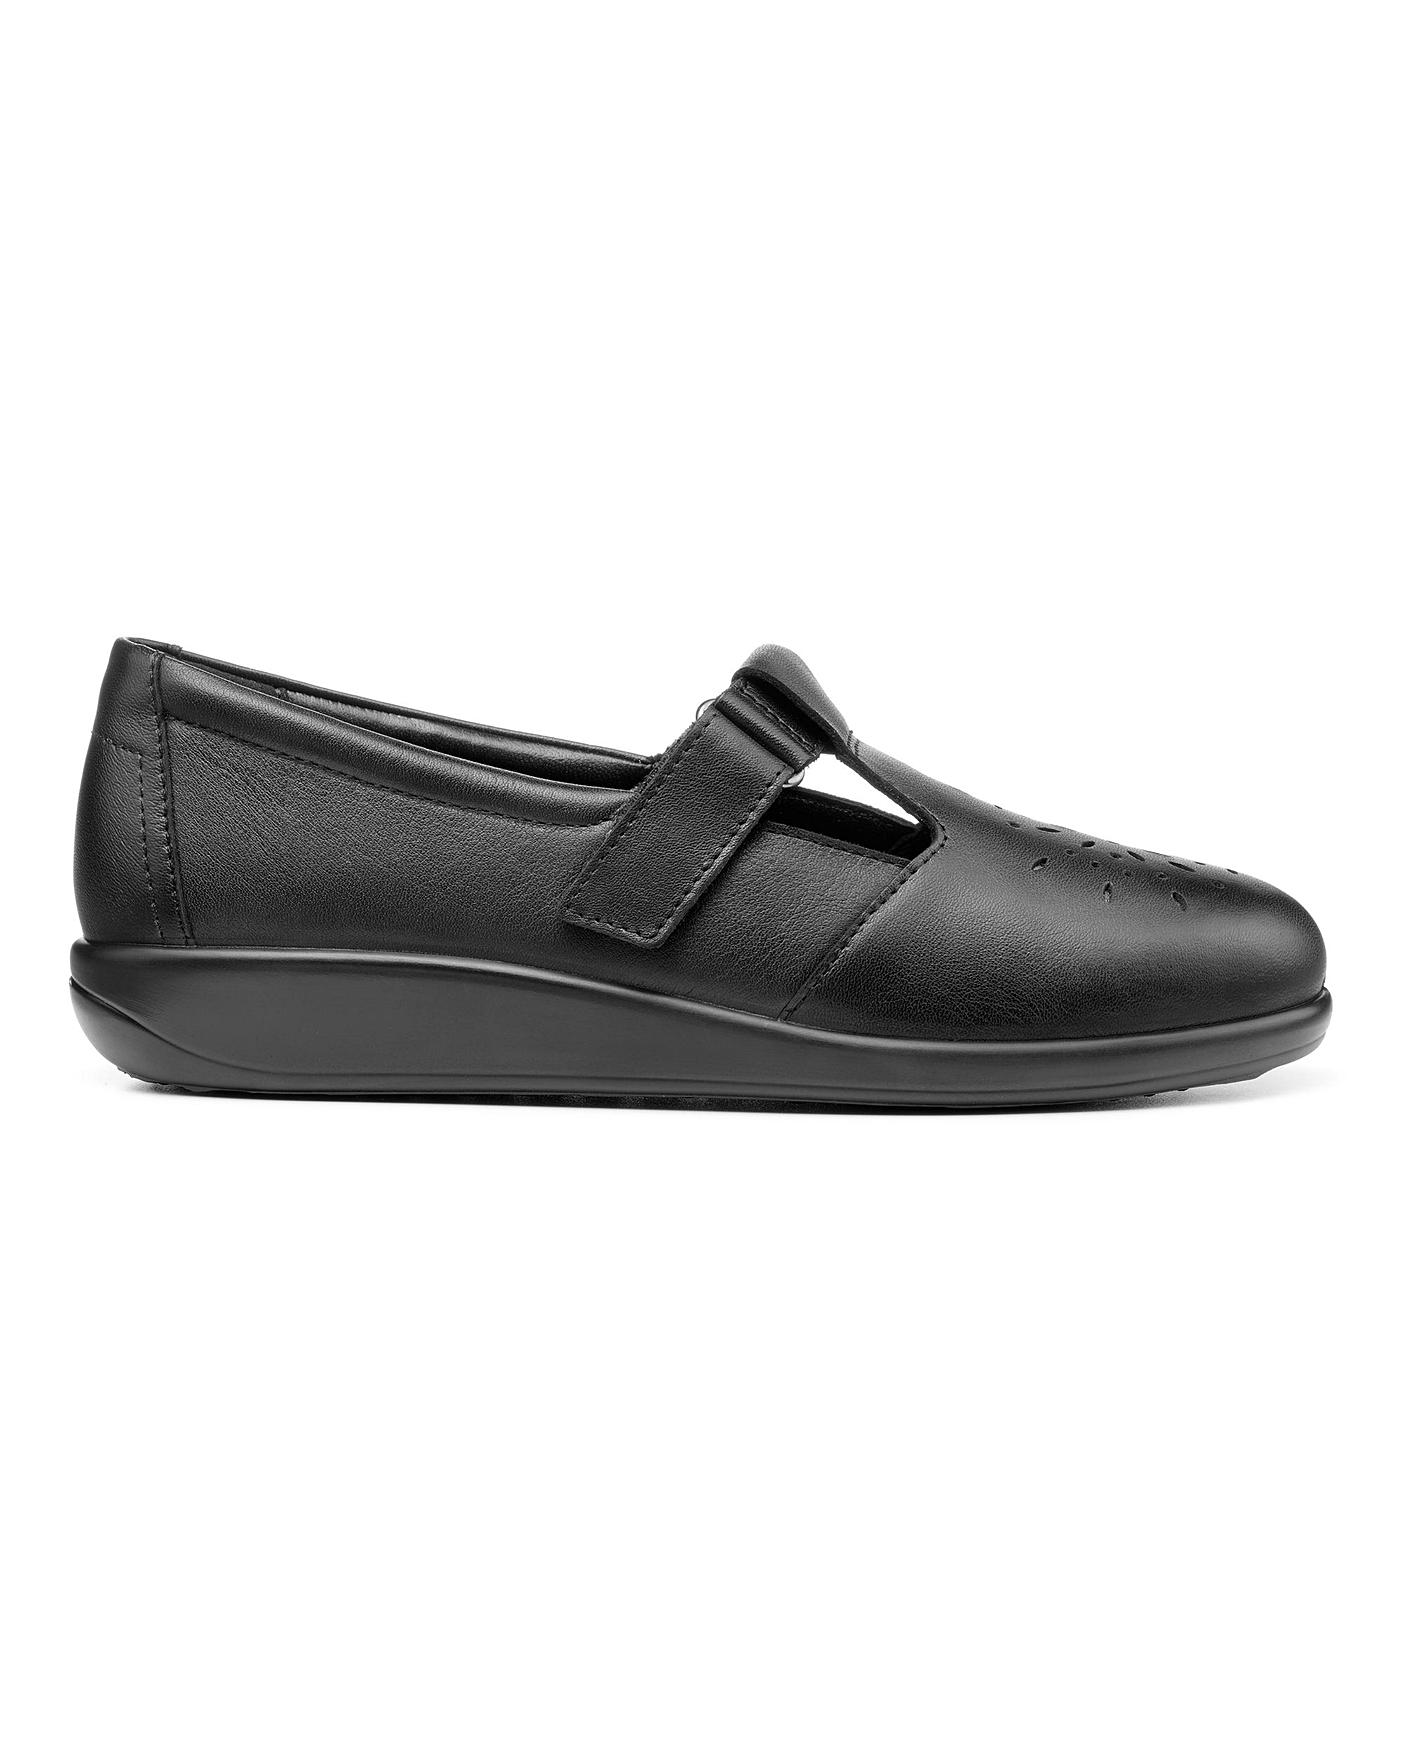 Hotter Sunset Wide Fit Casual Shoe | Ambrose Wilson